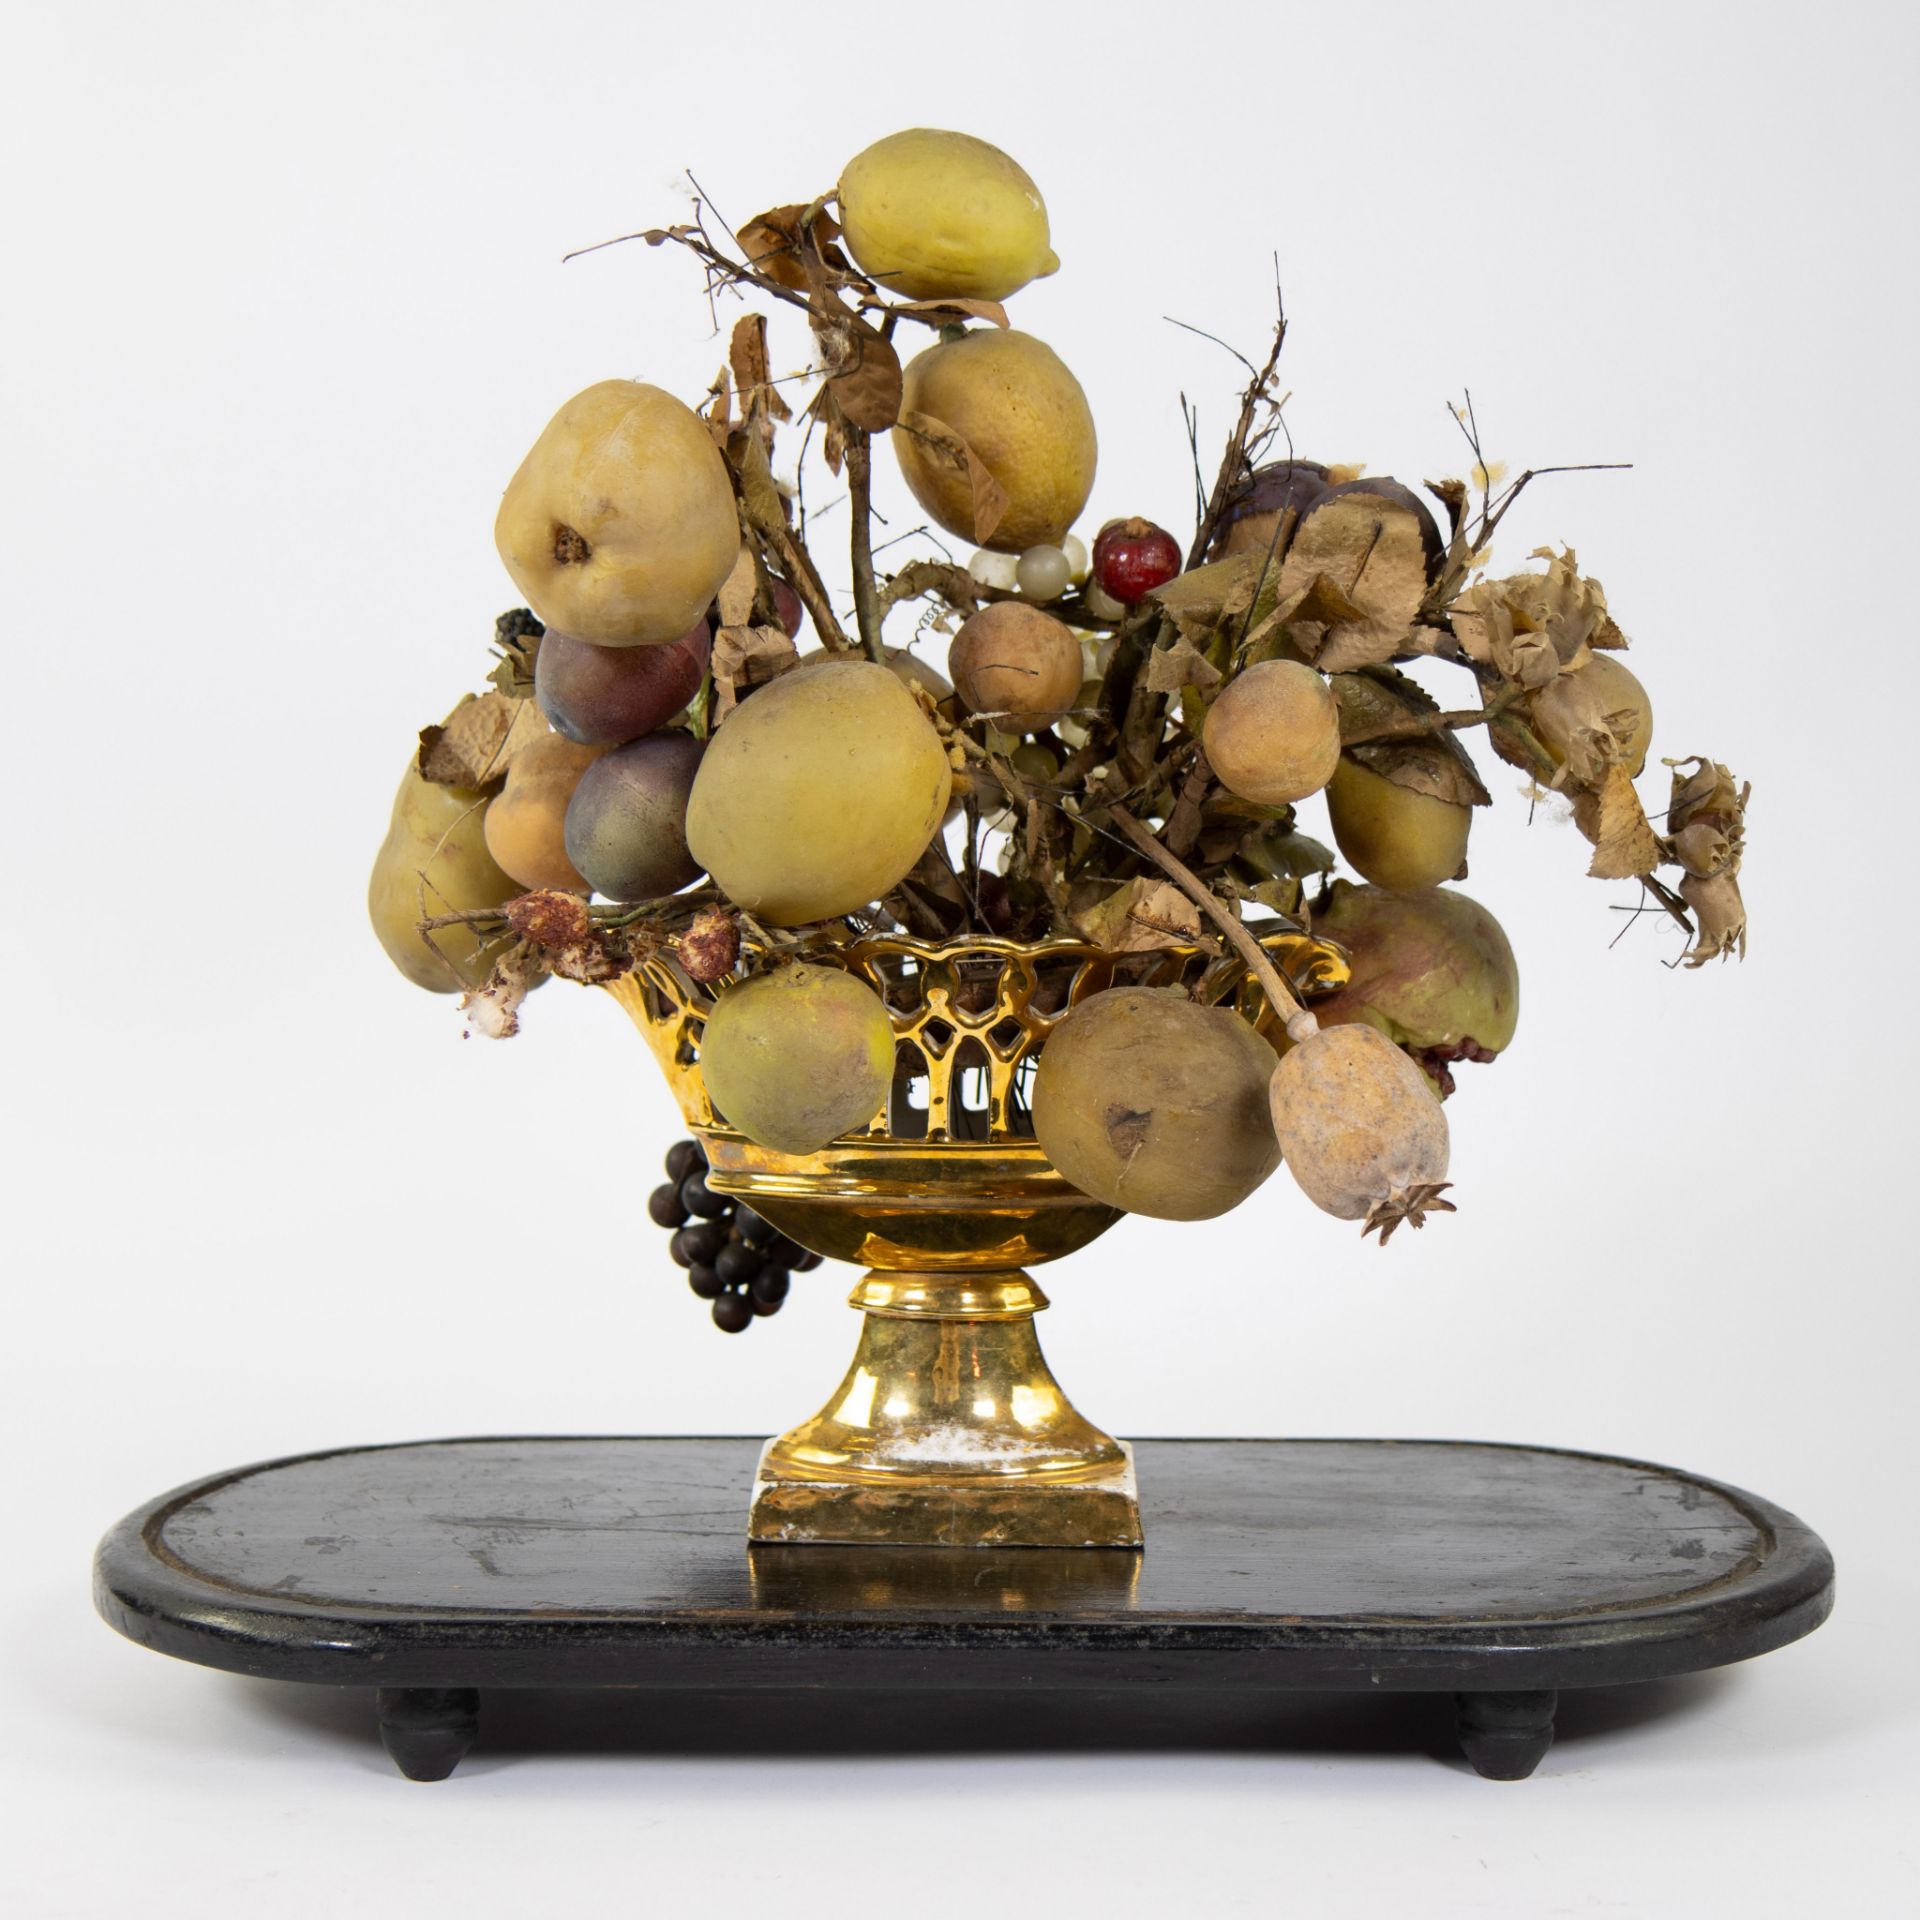 Openwork gilded porcelain basket with ornamental fruit under a glass dome - Image 4 of 5